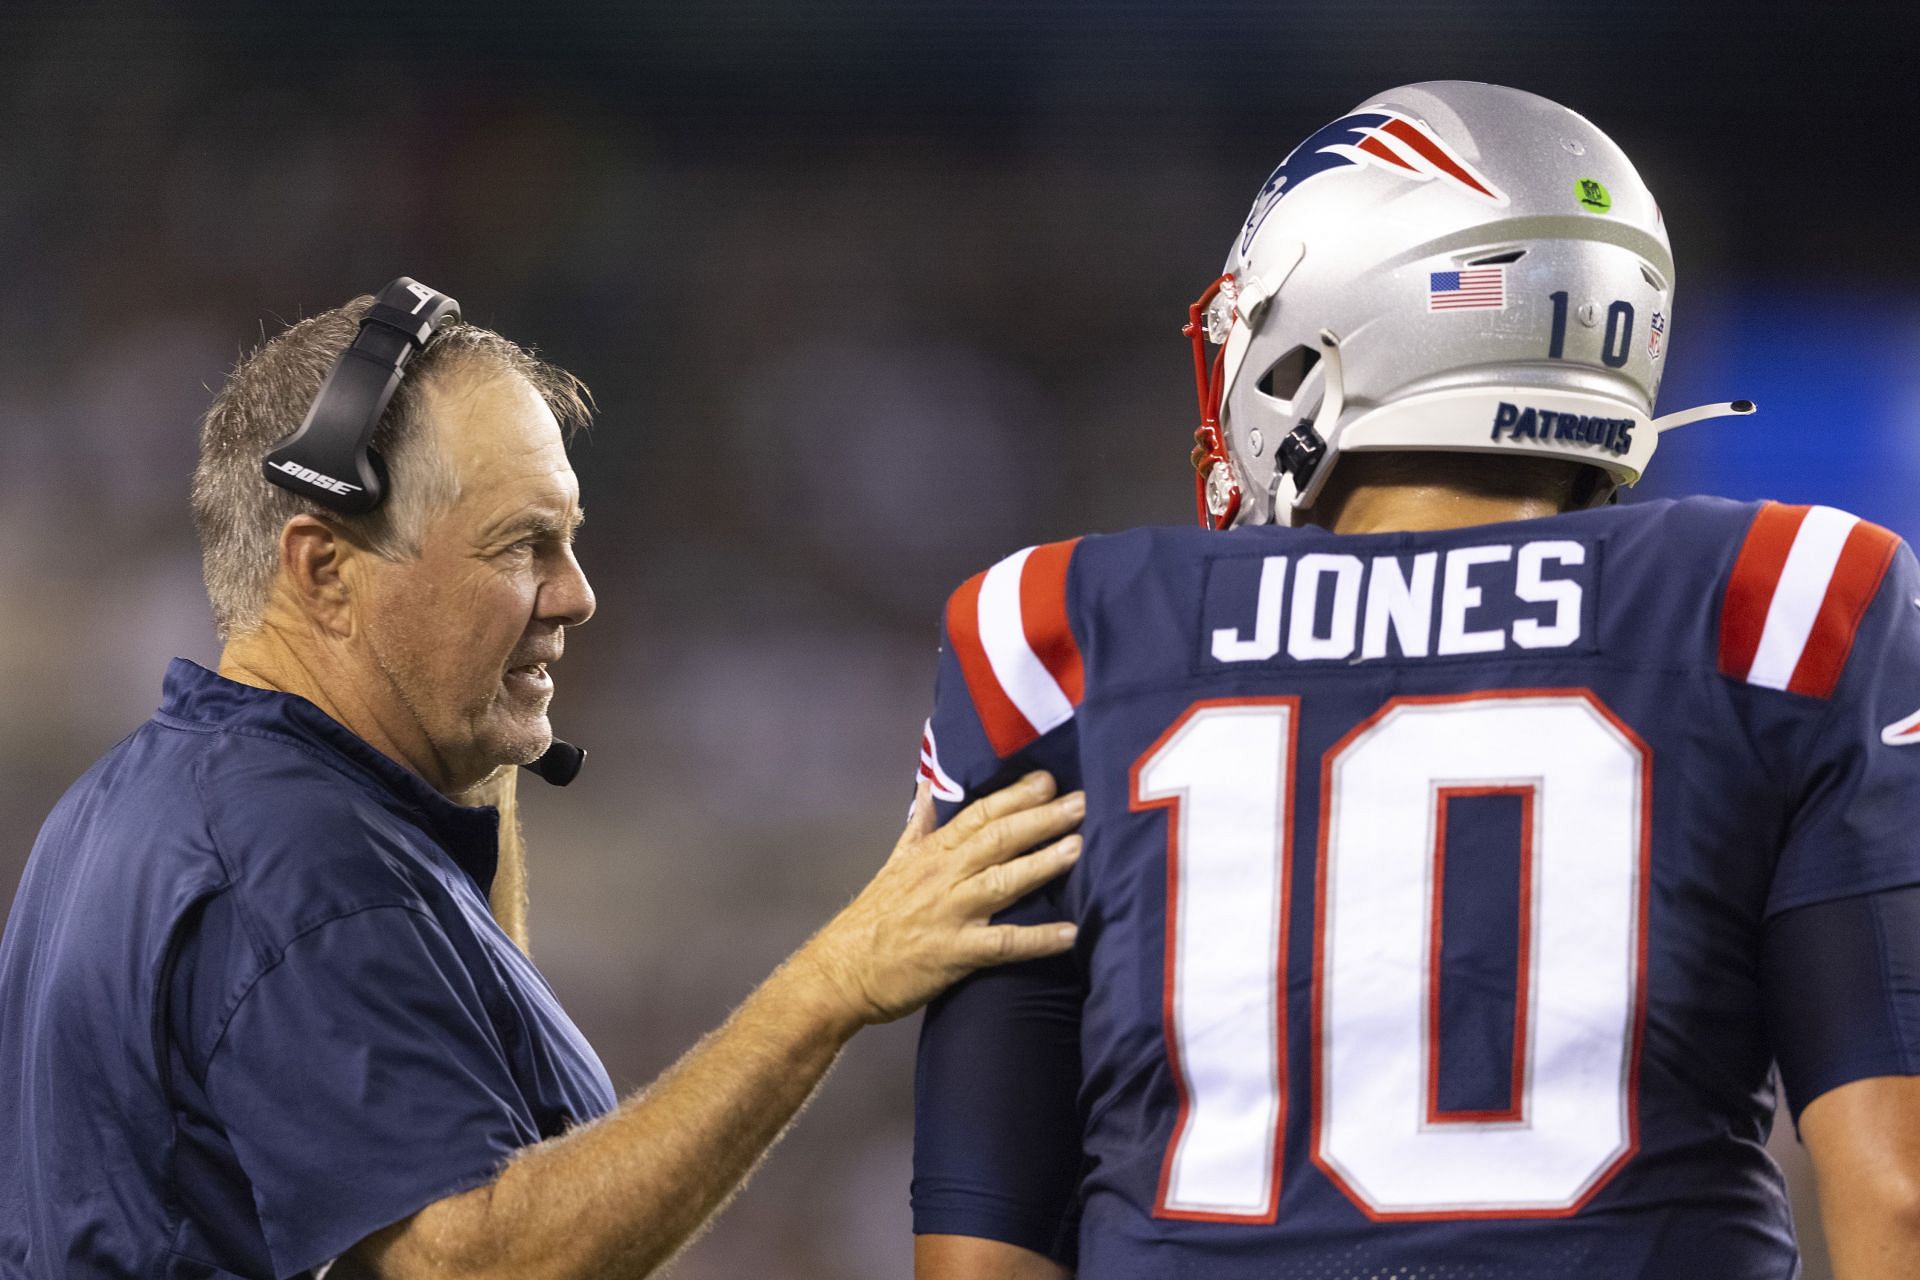 Armed with a new star quarterback in Mac Jones (R), Bill Belichick and the Patriots appear poised to resume their dynastic run